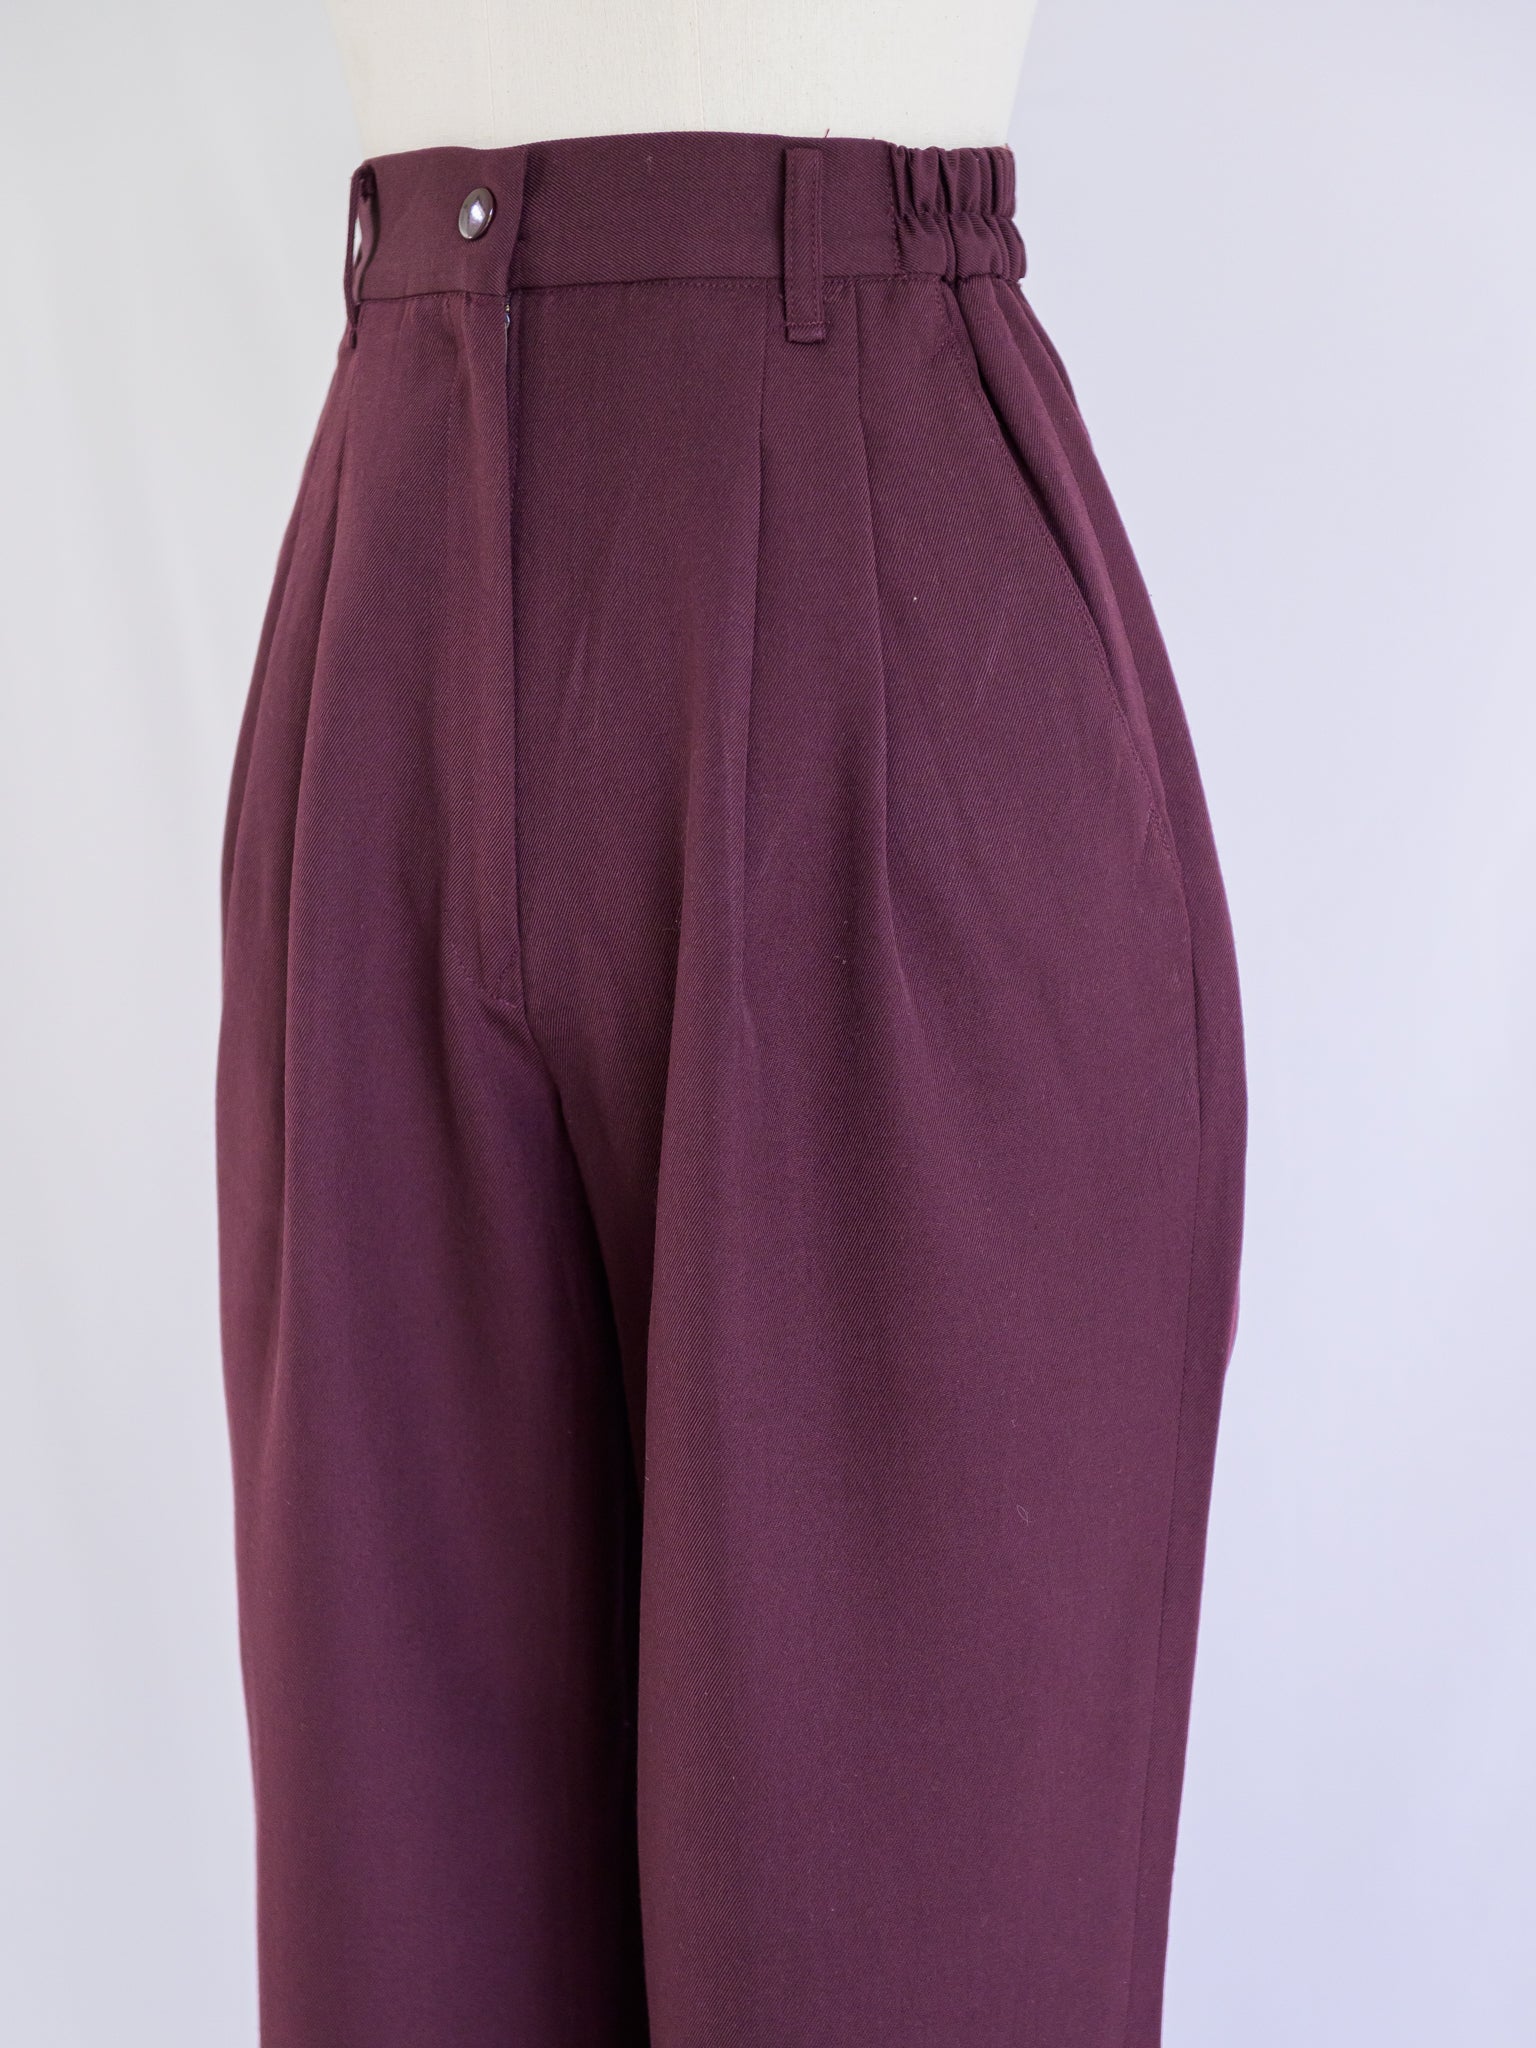 Vintage Maroon Polyester Wide Legged Trouser